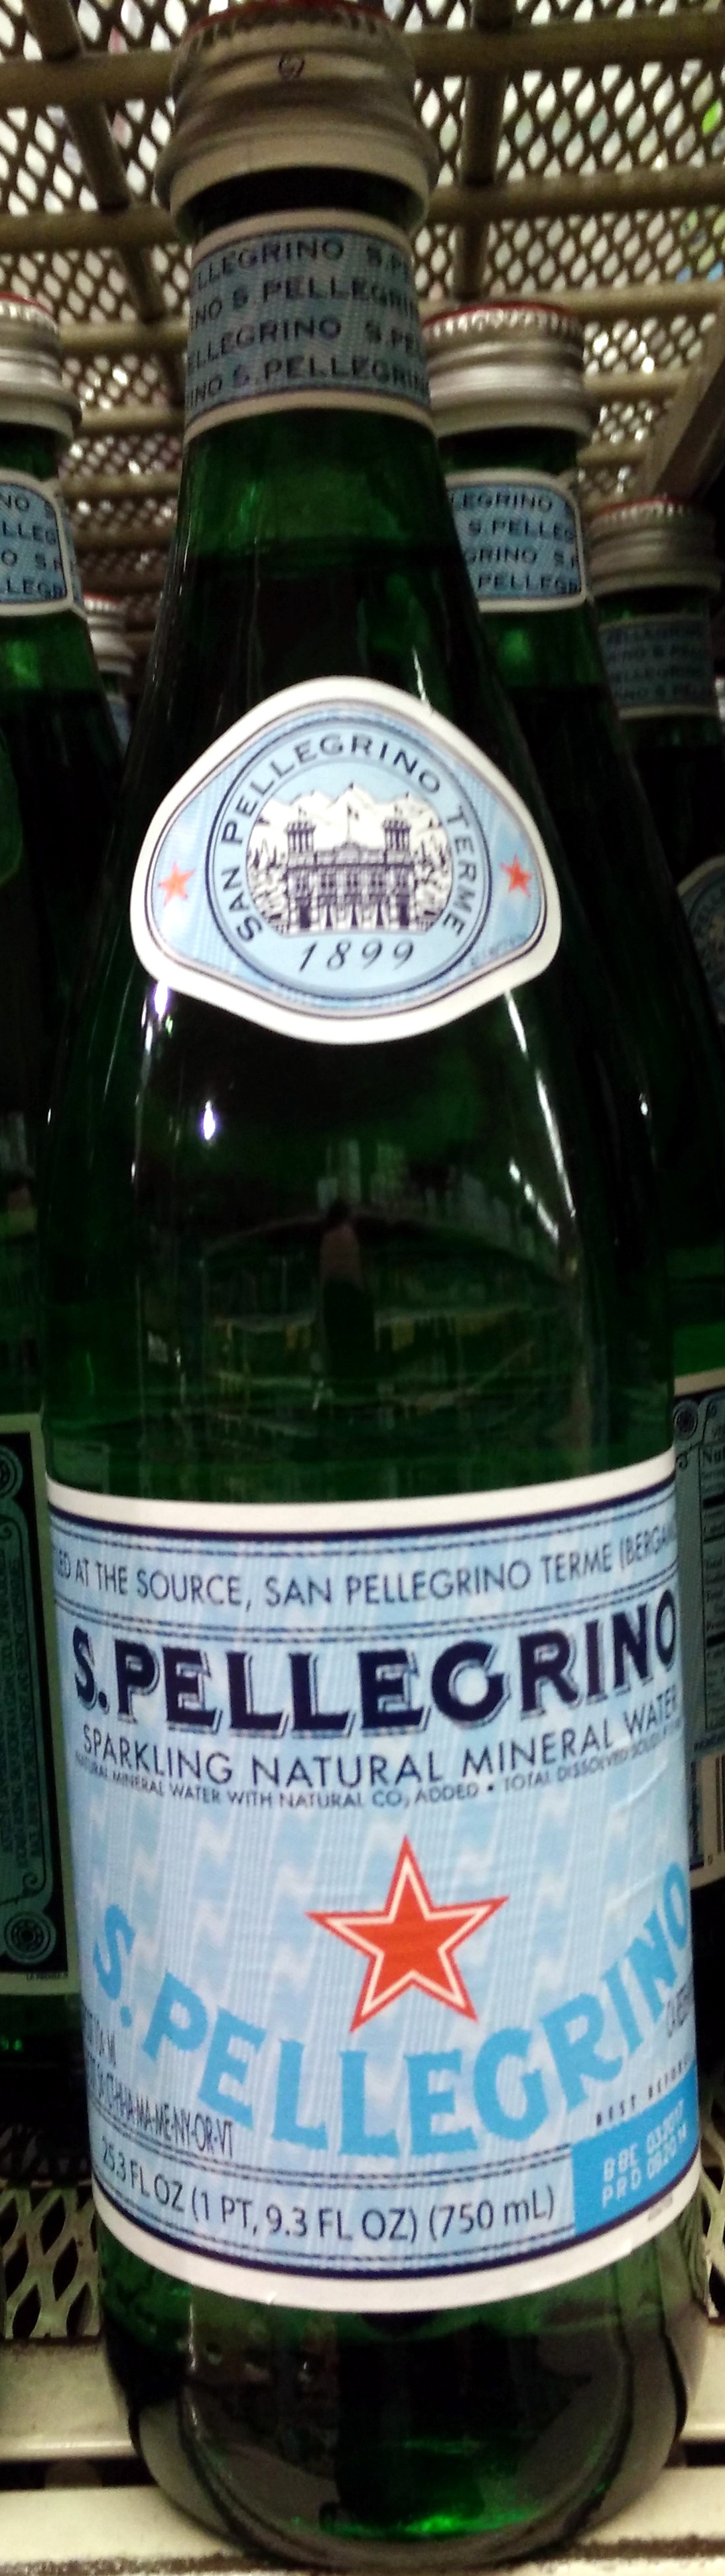 Sparkling natural mineral water - Product - en